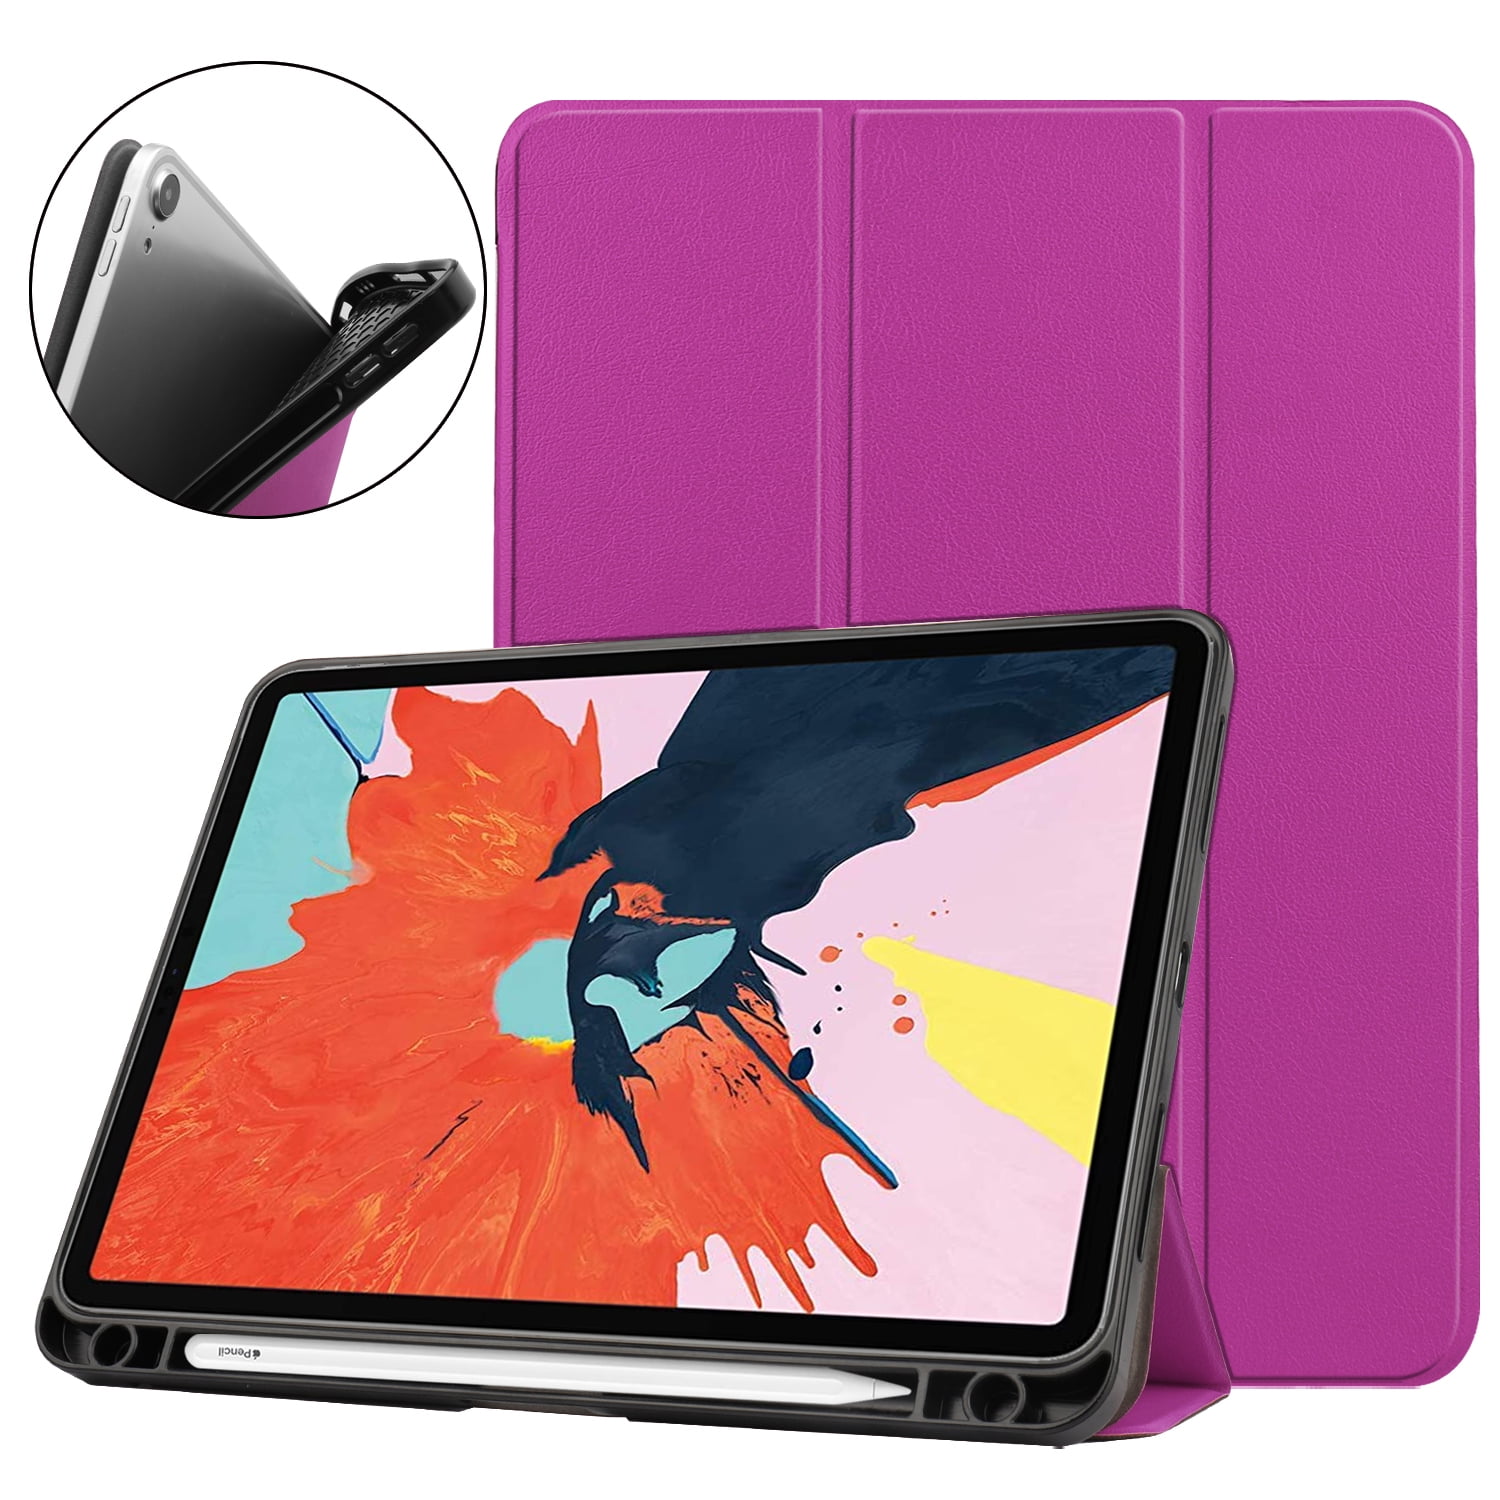 Allytech iPad Pro 11 2020 Case 2nd Generation, Slim Lightweight [Support  Apple Pencil Charging] Auto Sleep Wake Trifold Stand Protective Smart Cover